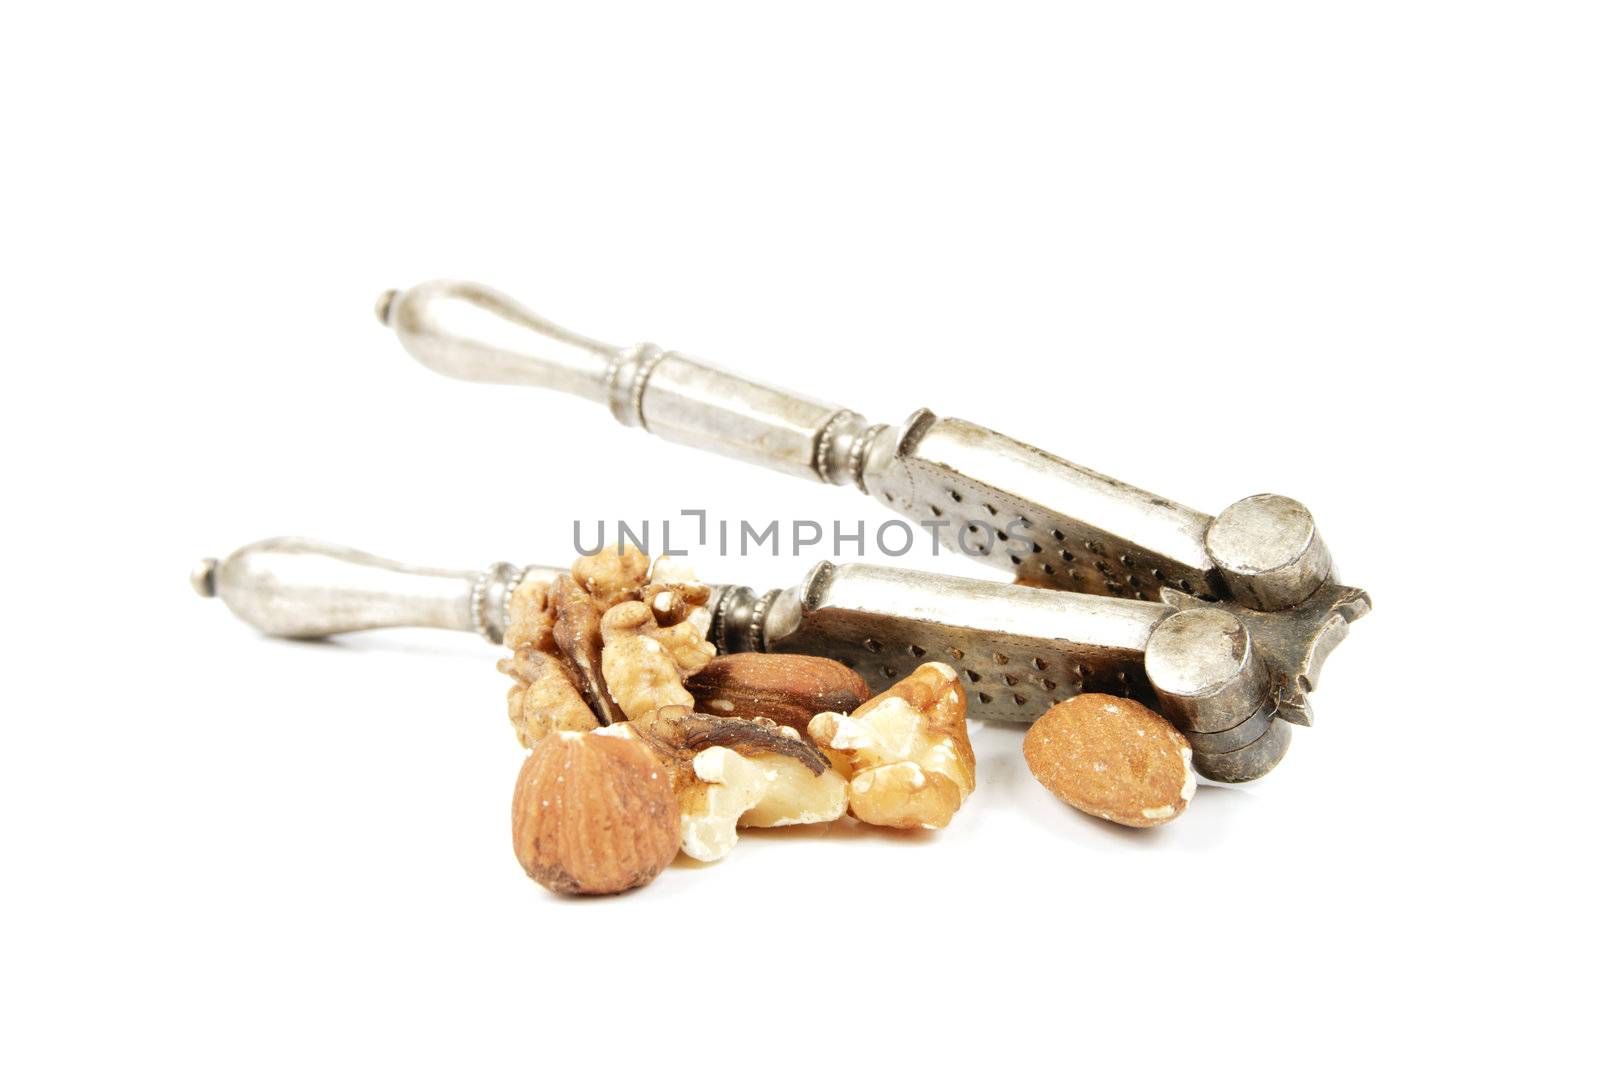 Mixed Nuts and Nut Cracker by KeithWilson